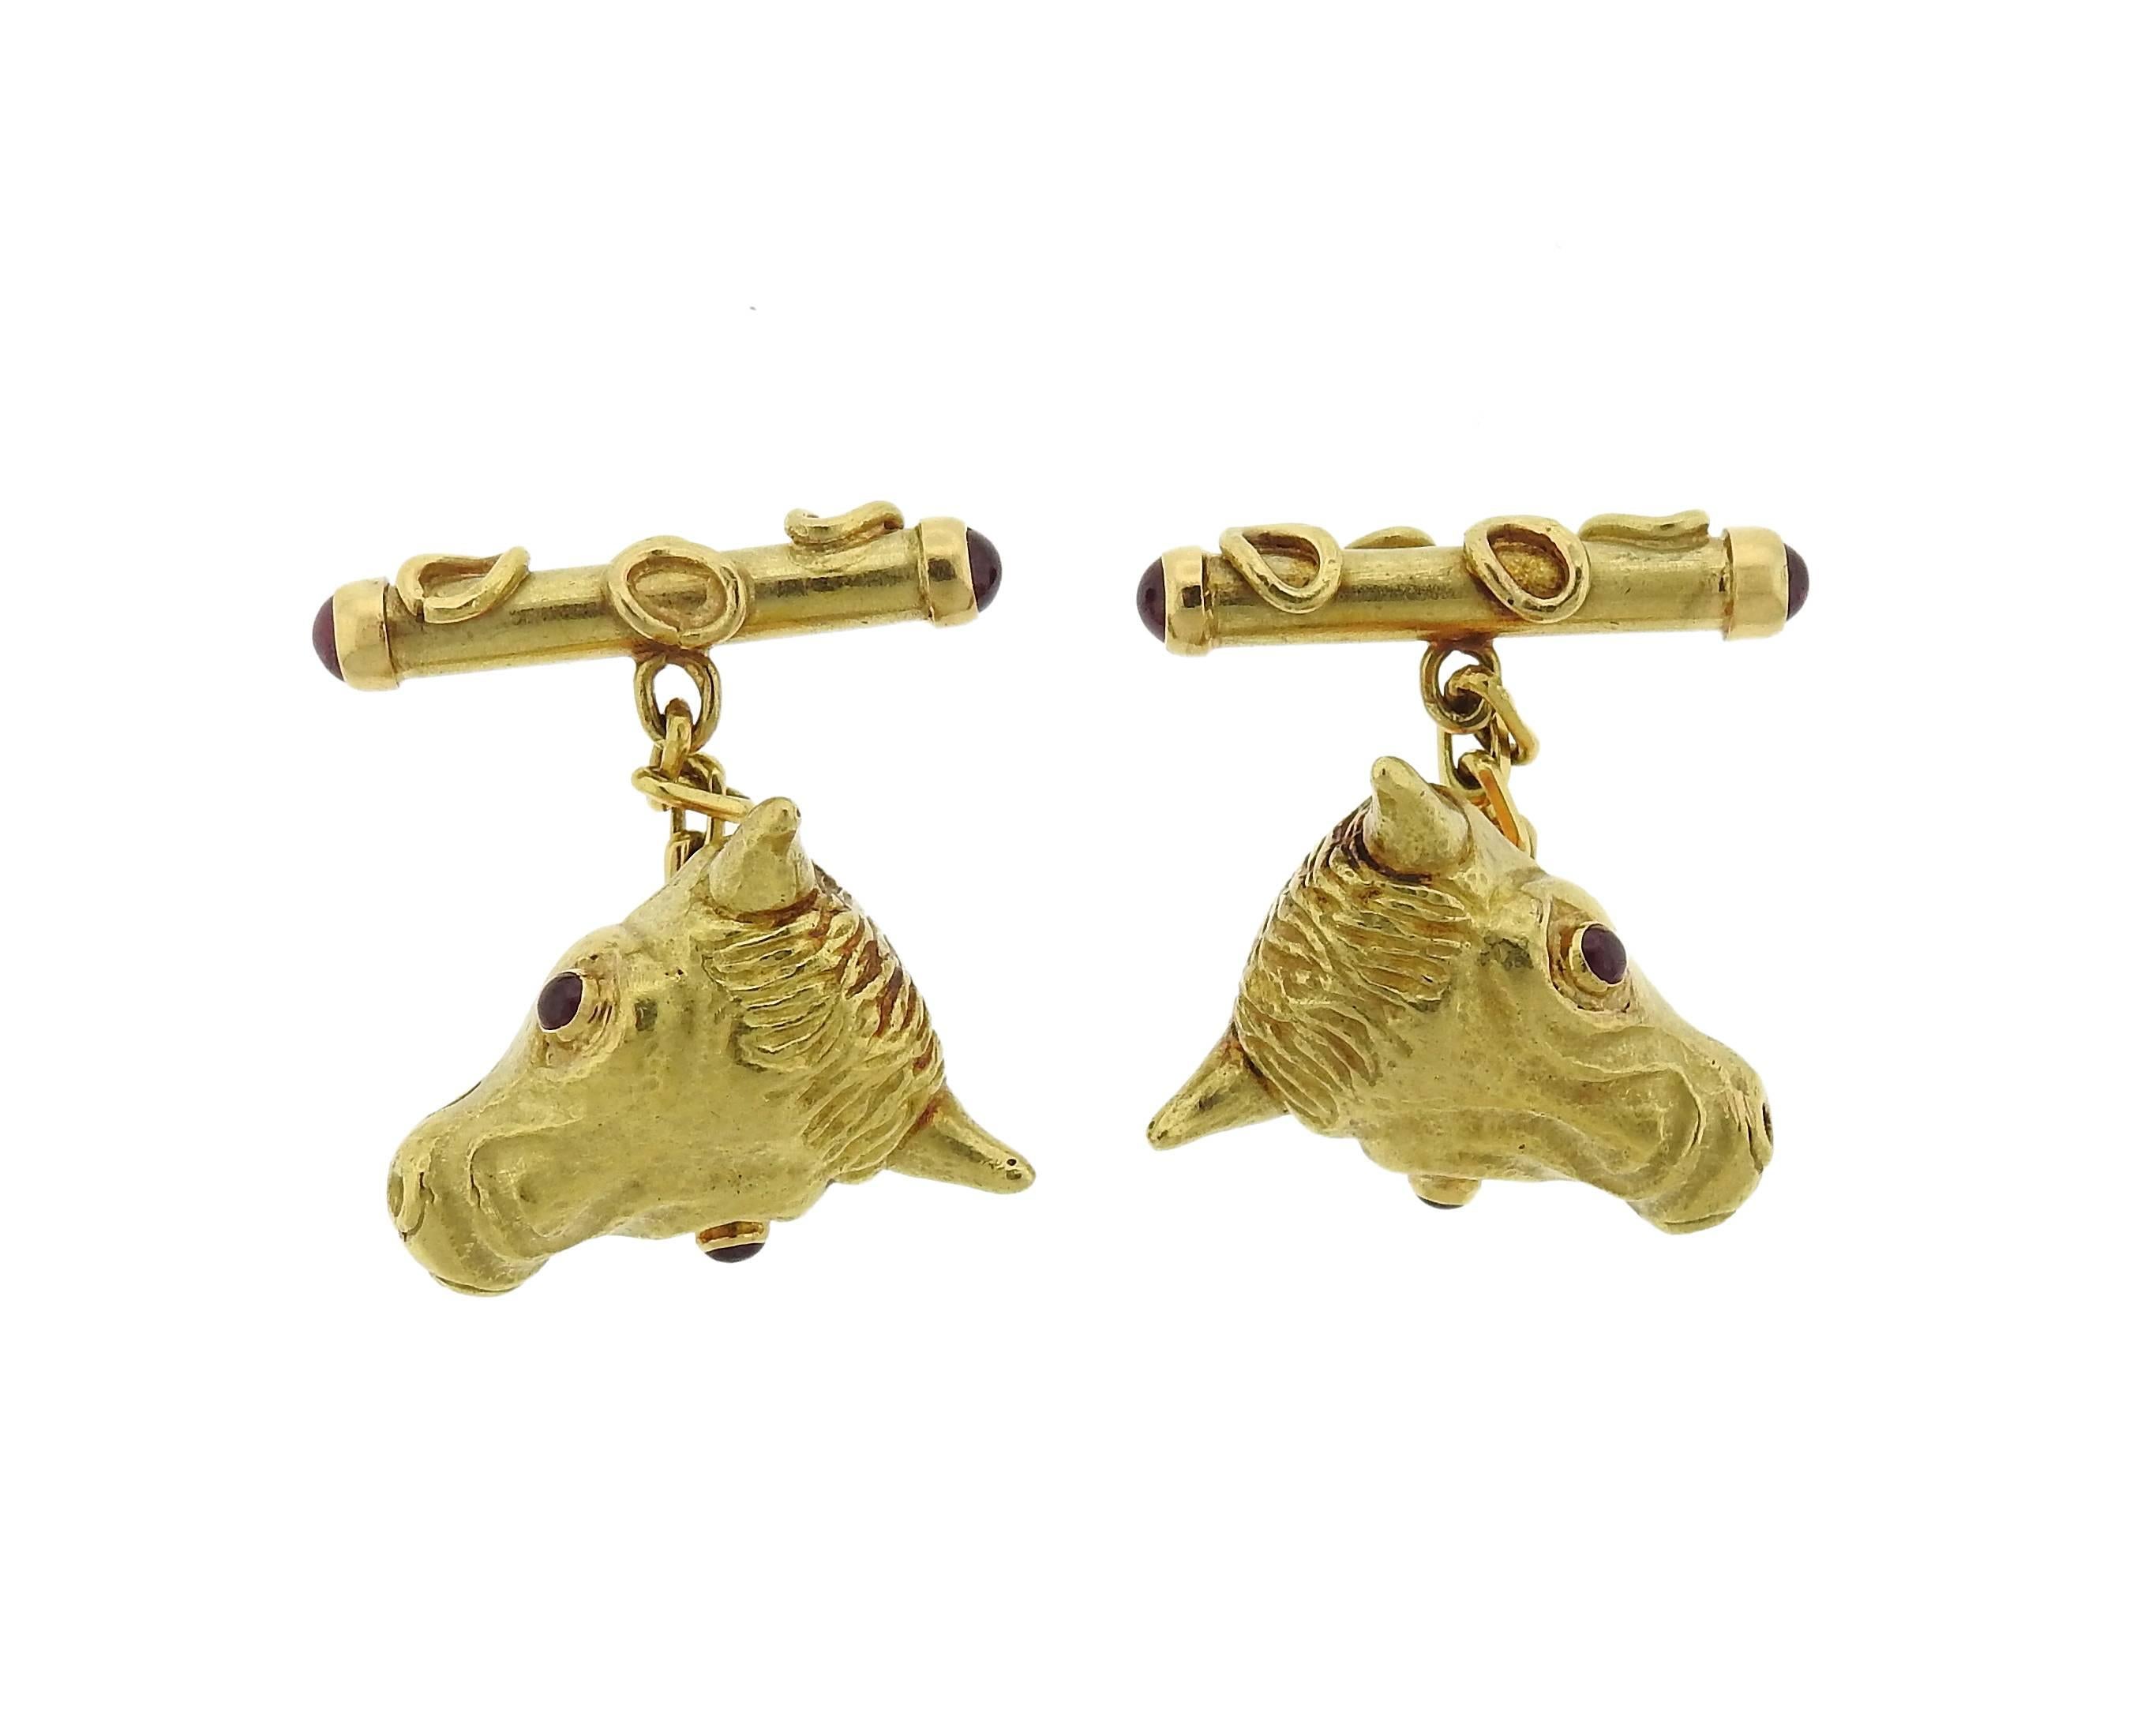 Pair of large 18k yellow gold cufflinks,  by Andrew Grima, featuring bull's head, with ruby eyes. Cufflink top measures 23mm x 20mm. Marked: 750, Grima. Weight - 22.8 grams 